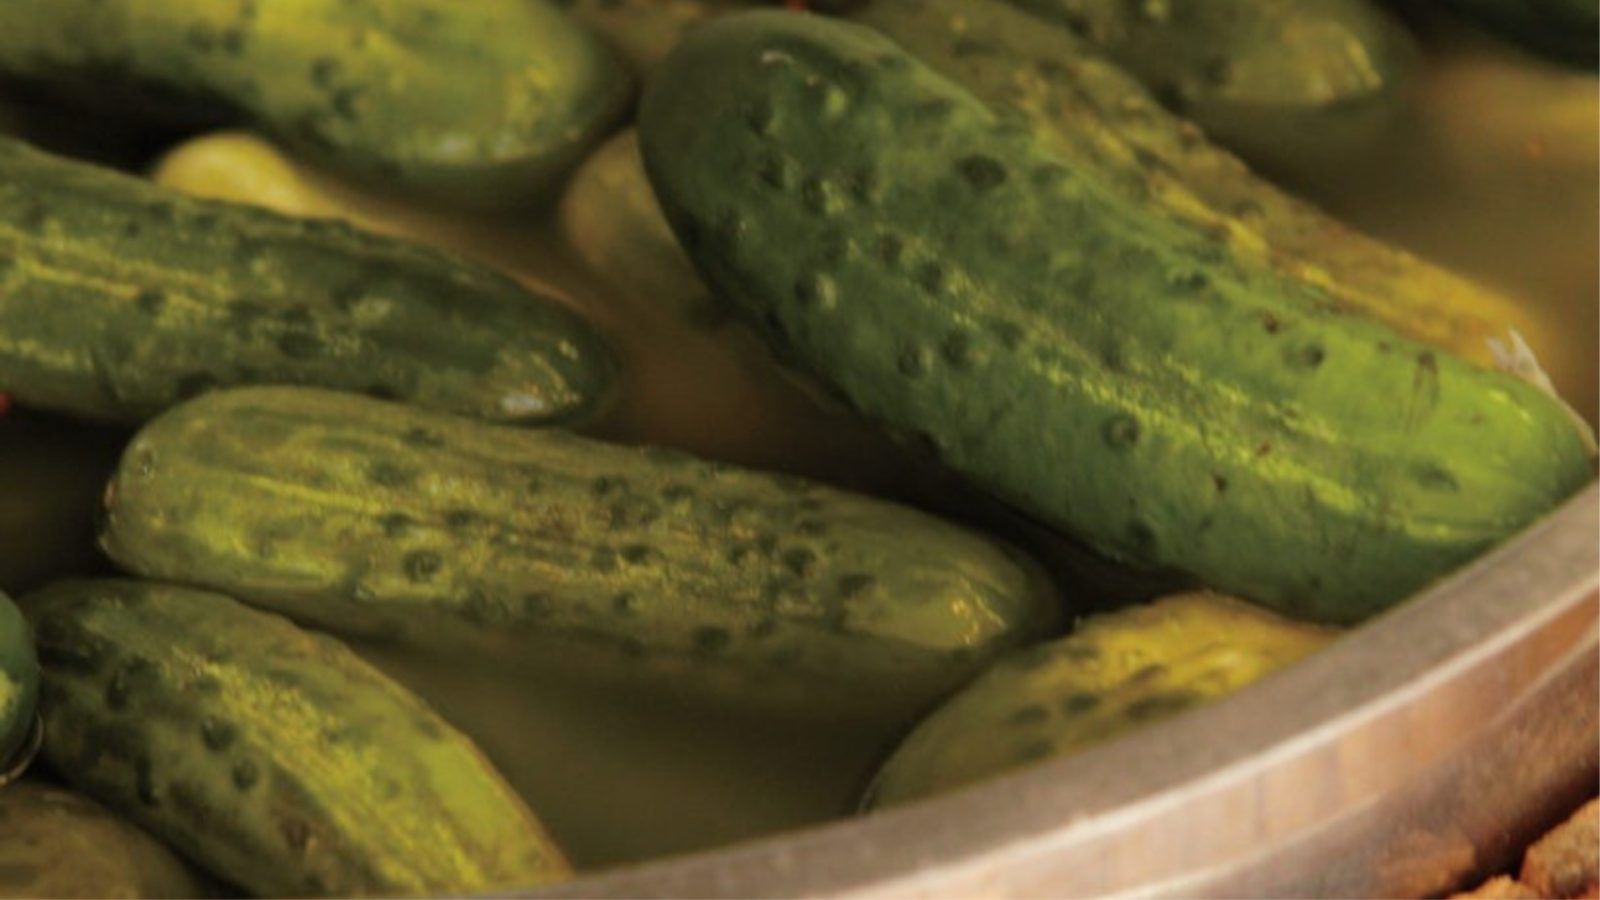 Are pickles cucumbers? Here’s what you need to know about the pickling process